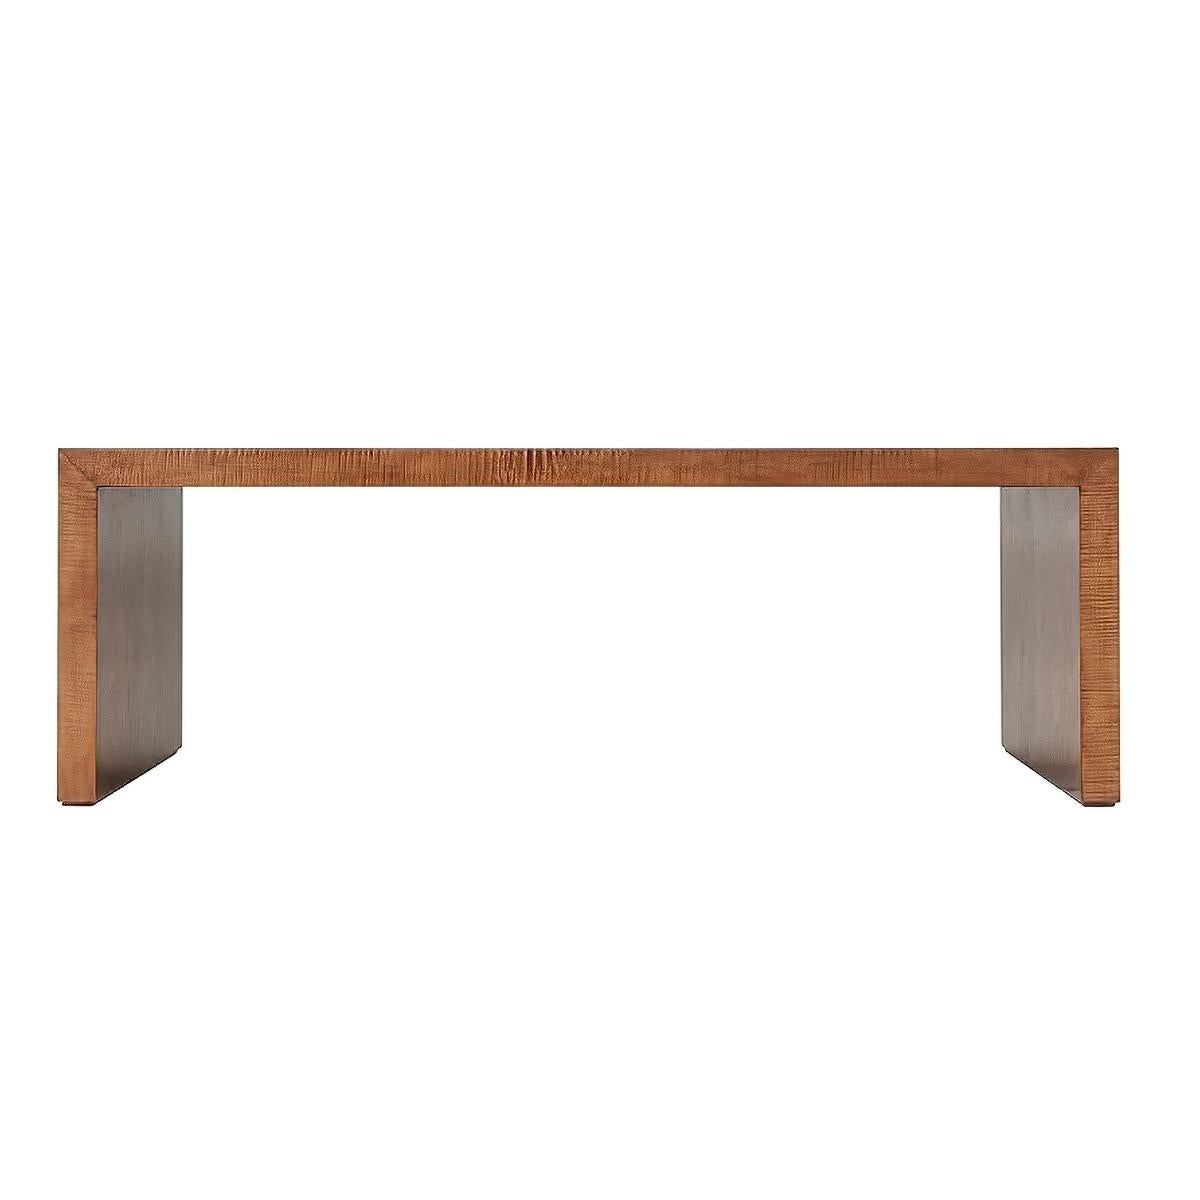 A modern organic marquetry sycamore veneered coffee table.

Dimensions: 54